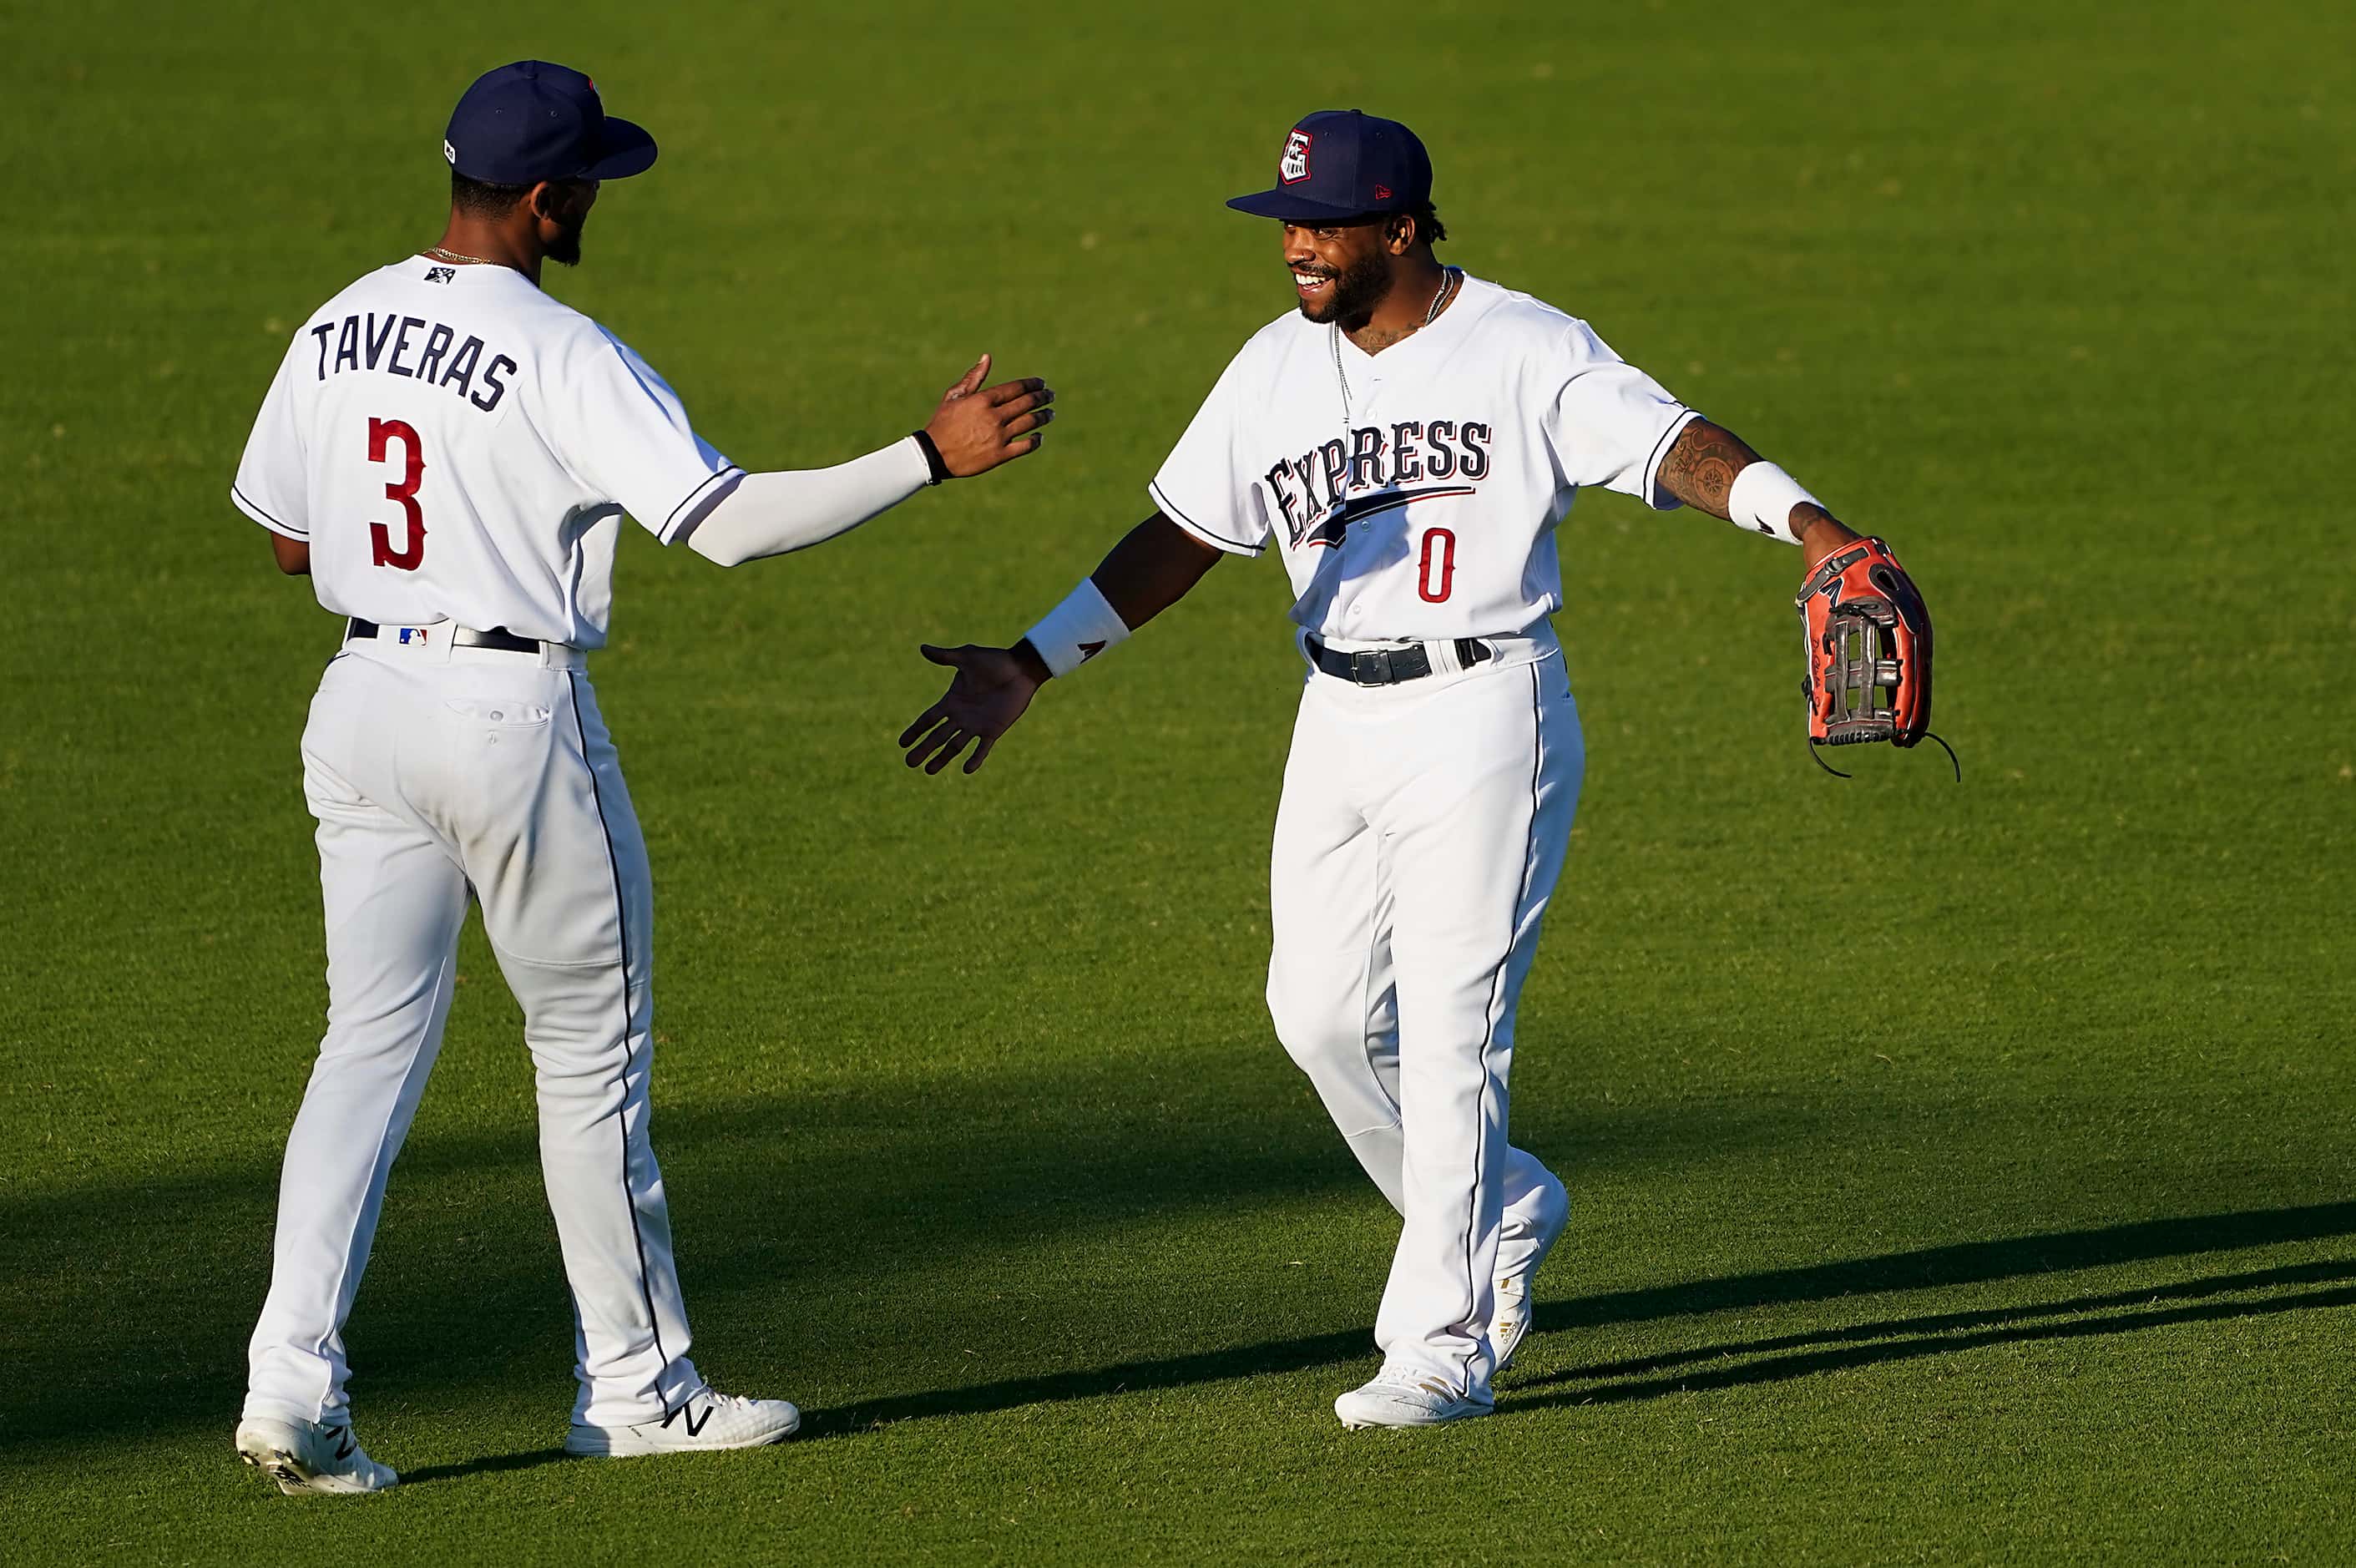 Round Rock Express outfielders Delino DeShields and Leody Taveras take the field for the...